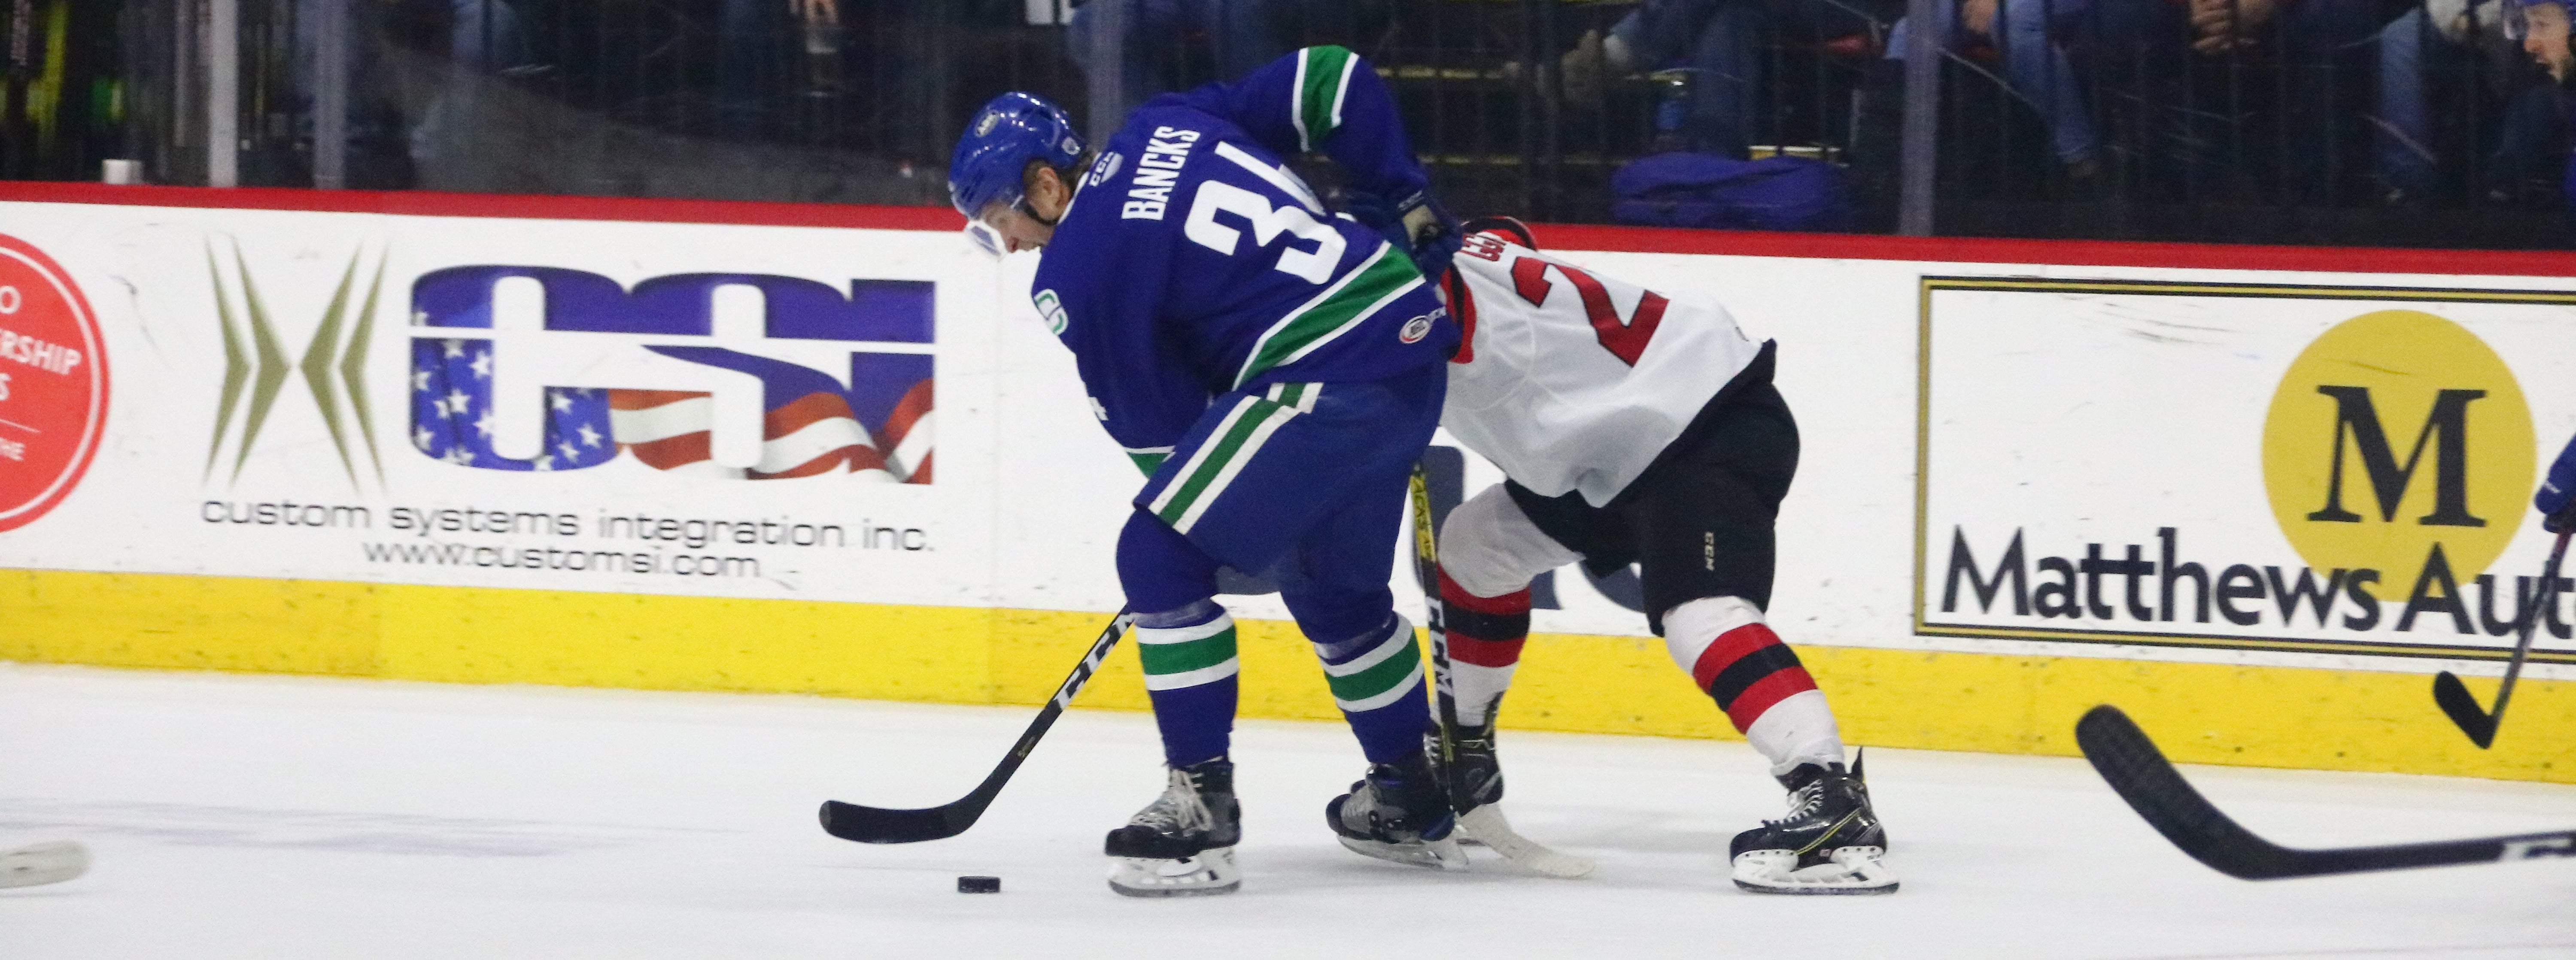 COMETS PLAGUED BY DEVILS' EFFICIENT ATTACK